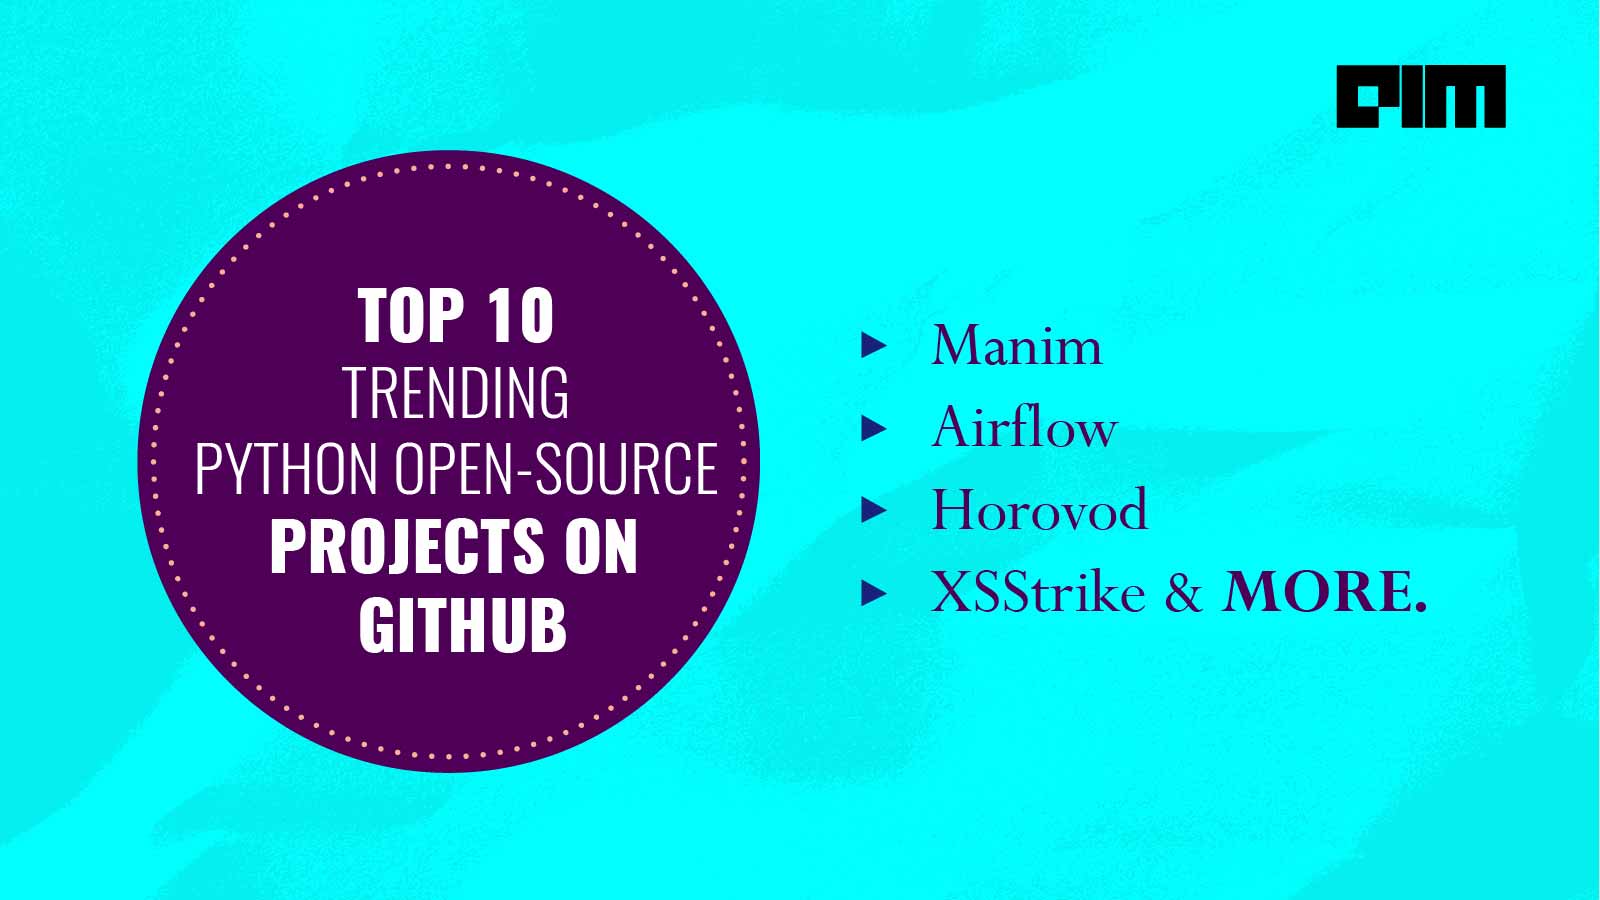 Top 10 Trending Python Projects On GitHub: 2020